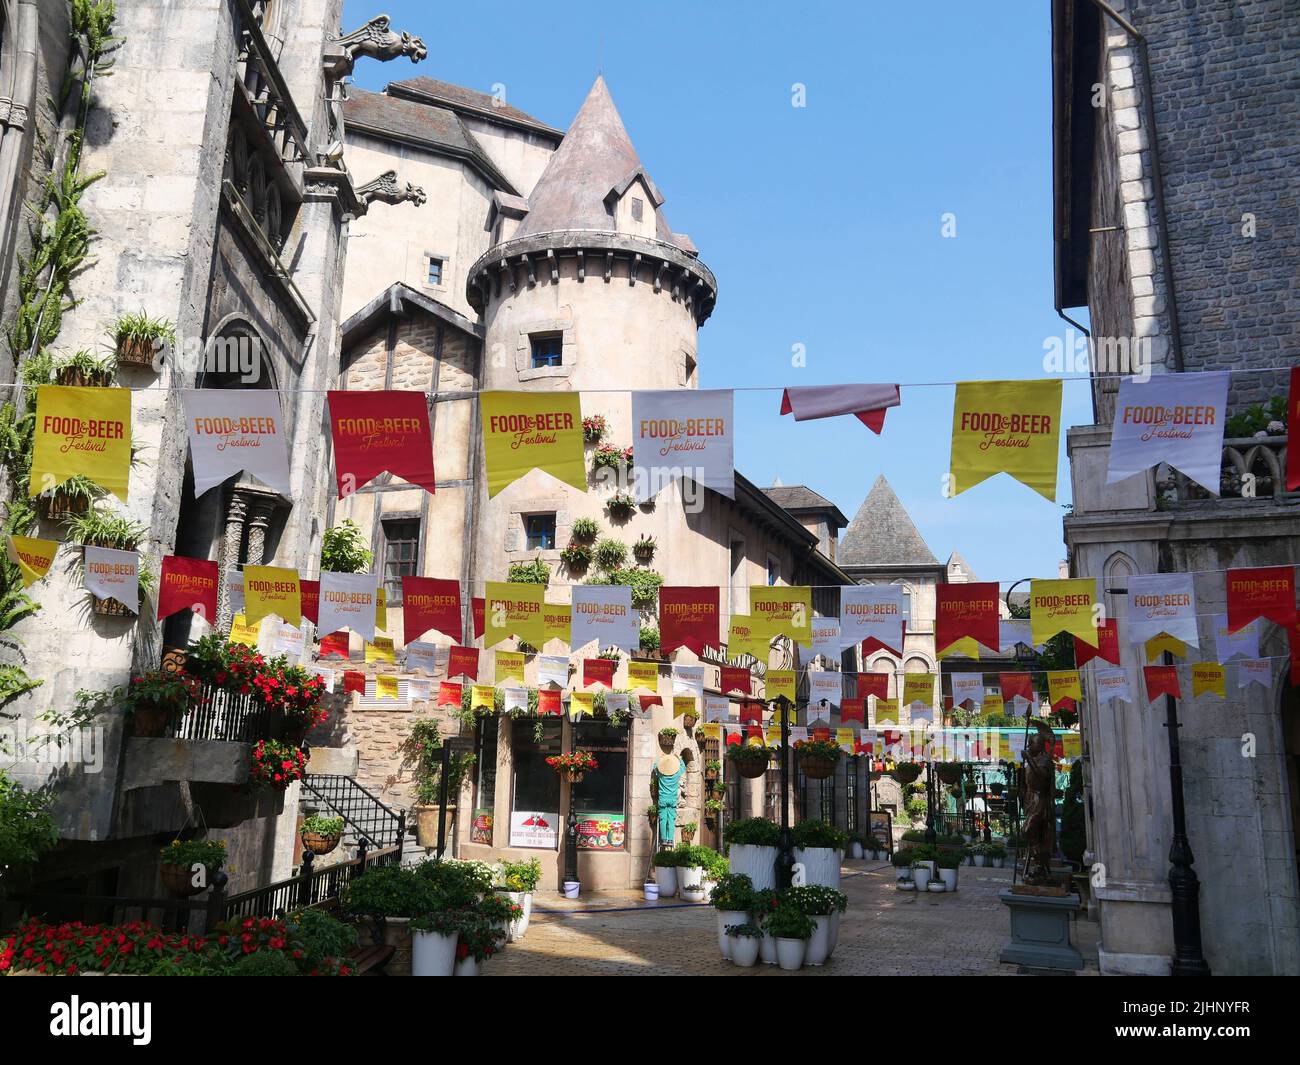 Da Nang, Vietnam - April 14, 2021: French village in Ba Na Hills Mountain Resort, the multi-levels complex filled with amusement rides, attractions, r Stock Photo